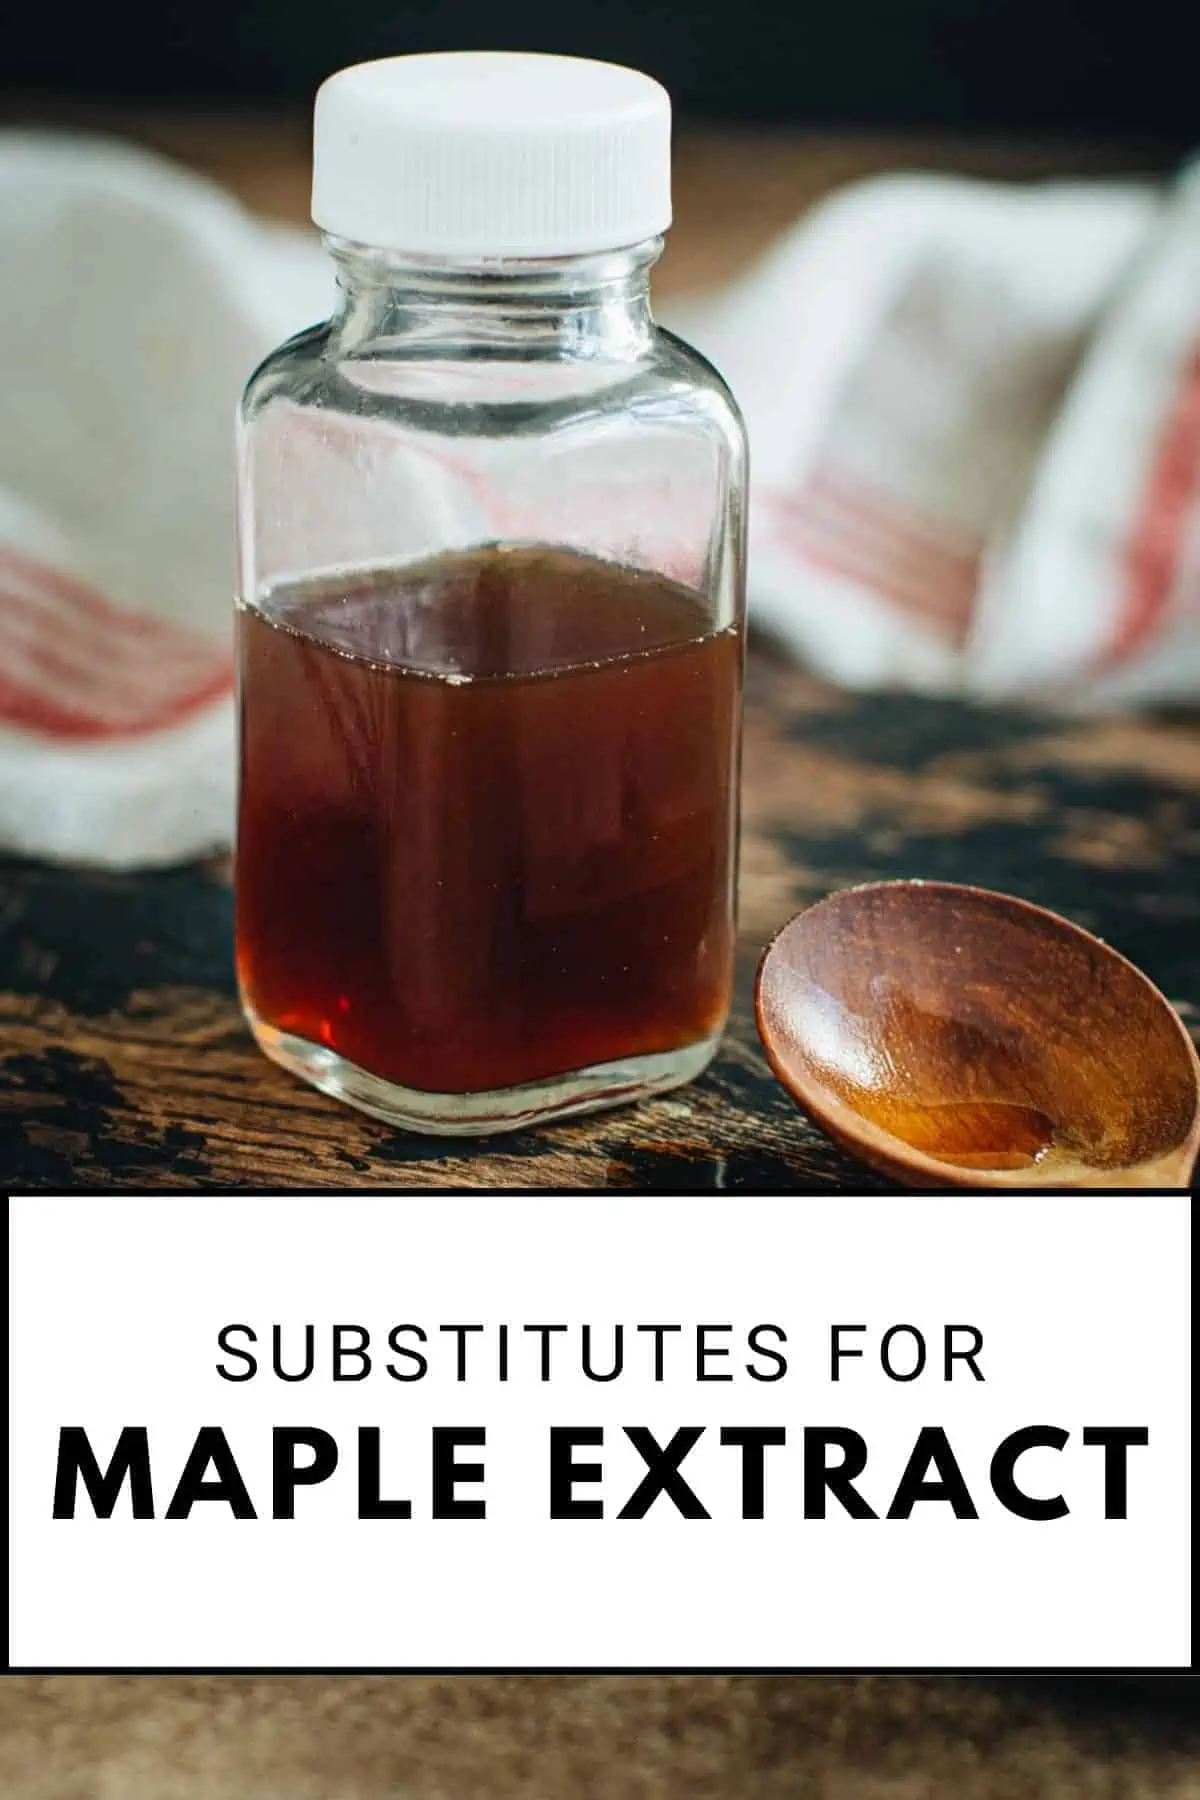 Substitutes for maple extract.